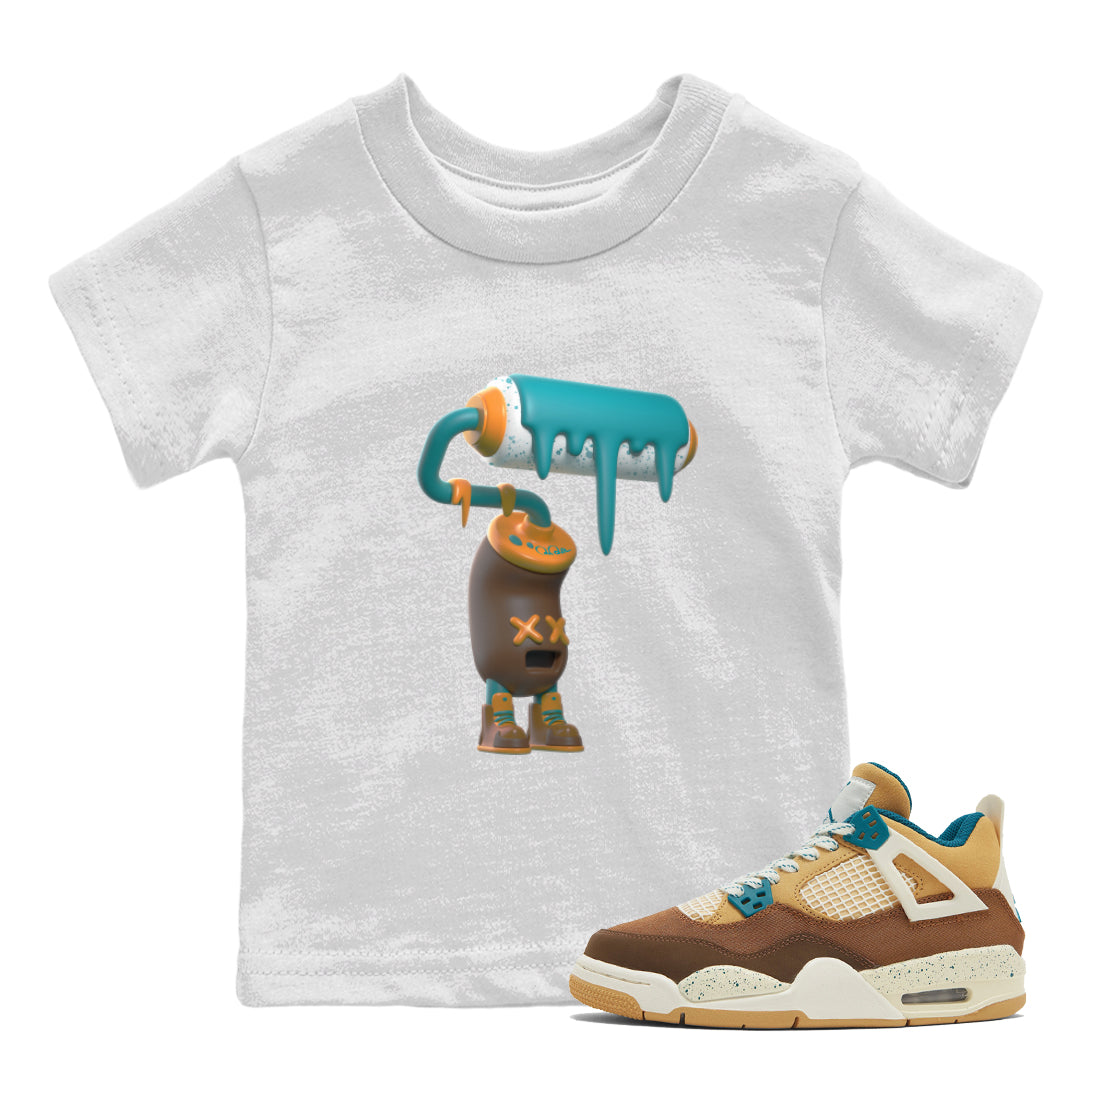 Air Jordan 4 Cacao Wow shirt to match jordans 3D Paint Roller sneaker tees AJ4 Cacao Wow SNRT Sneaker Release Tees Baby Toddler White 1 T-Shirt